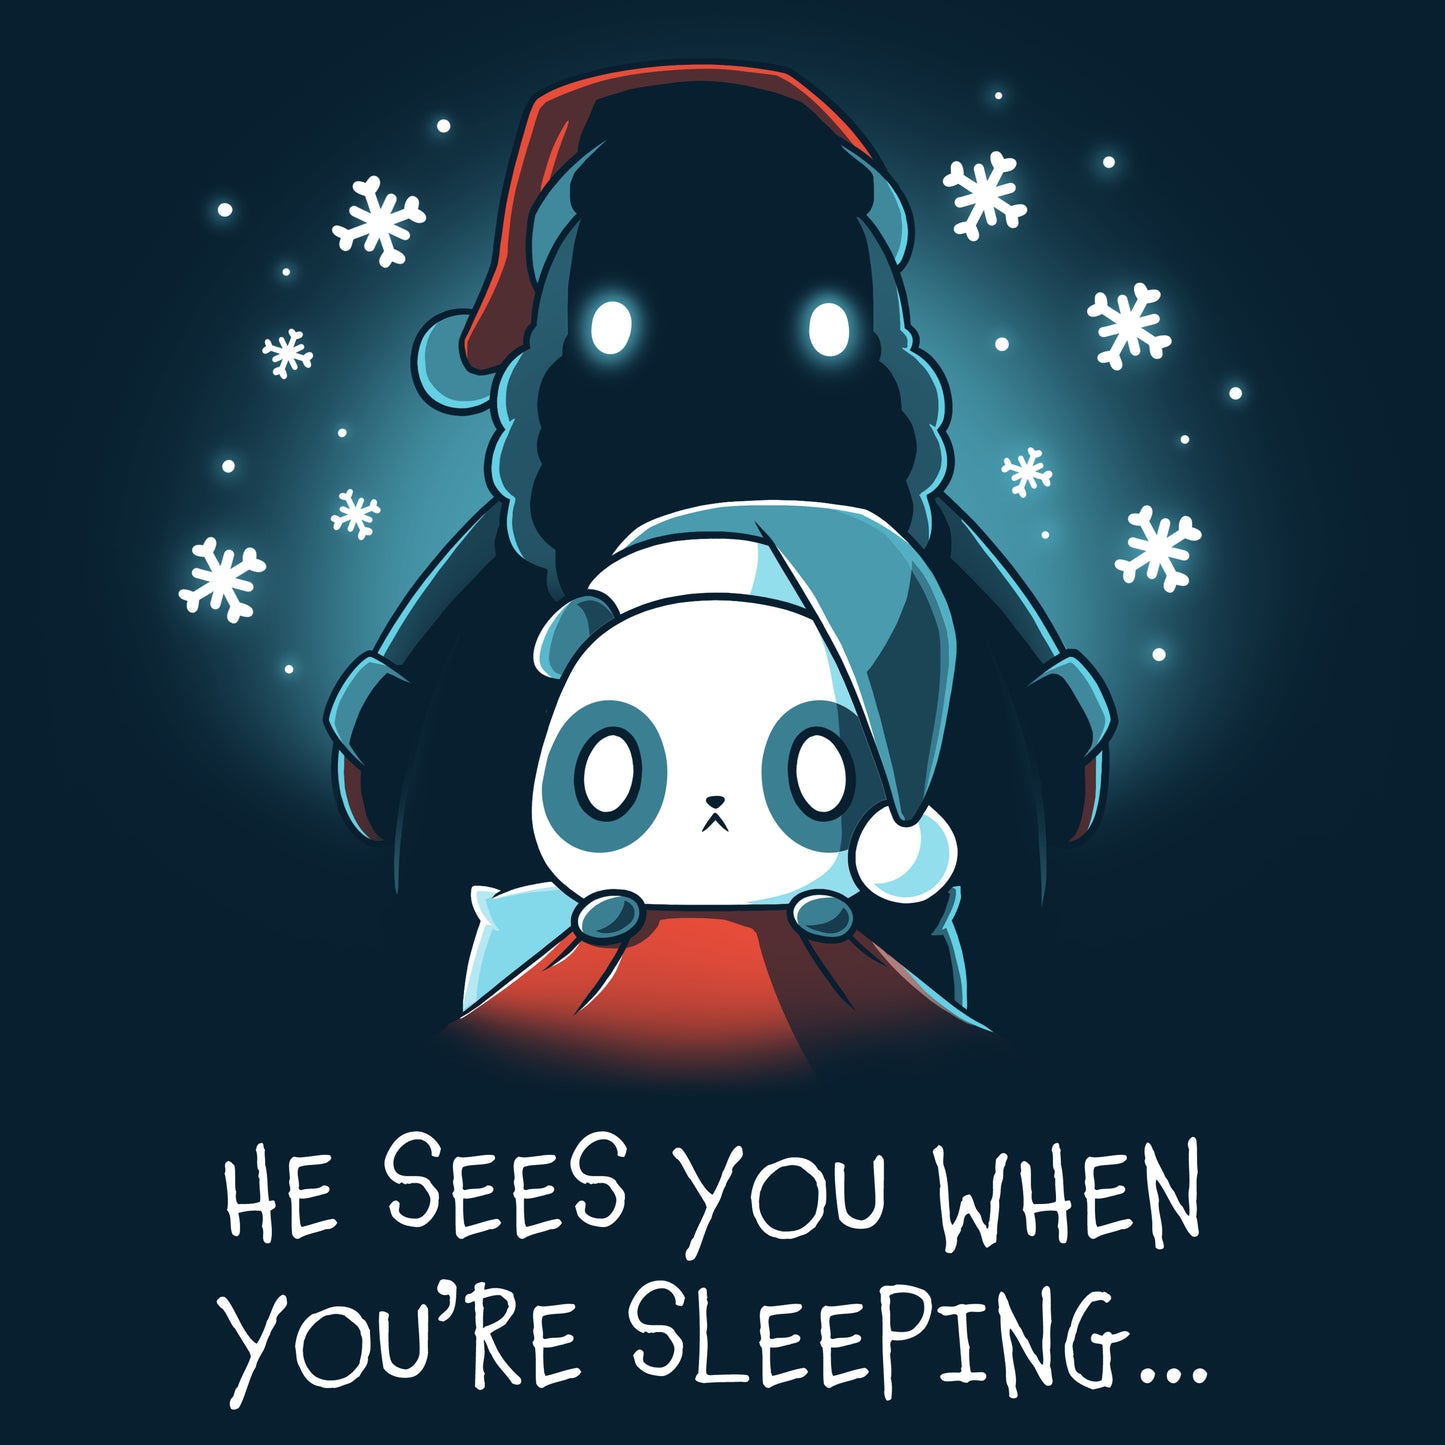 He sees you when you're sleeping in a navy blue TeeTurtle "He Sees You When You're Sleeping" t-shirt.